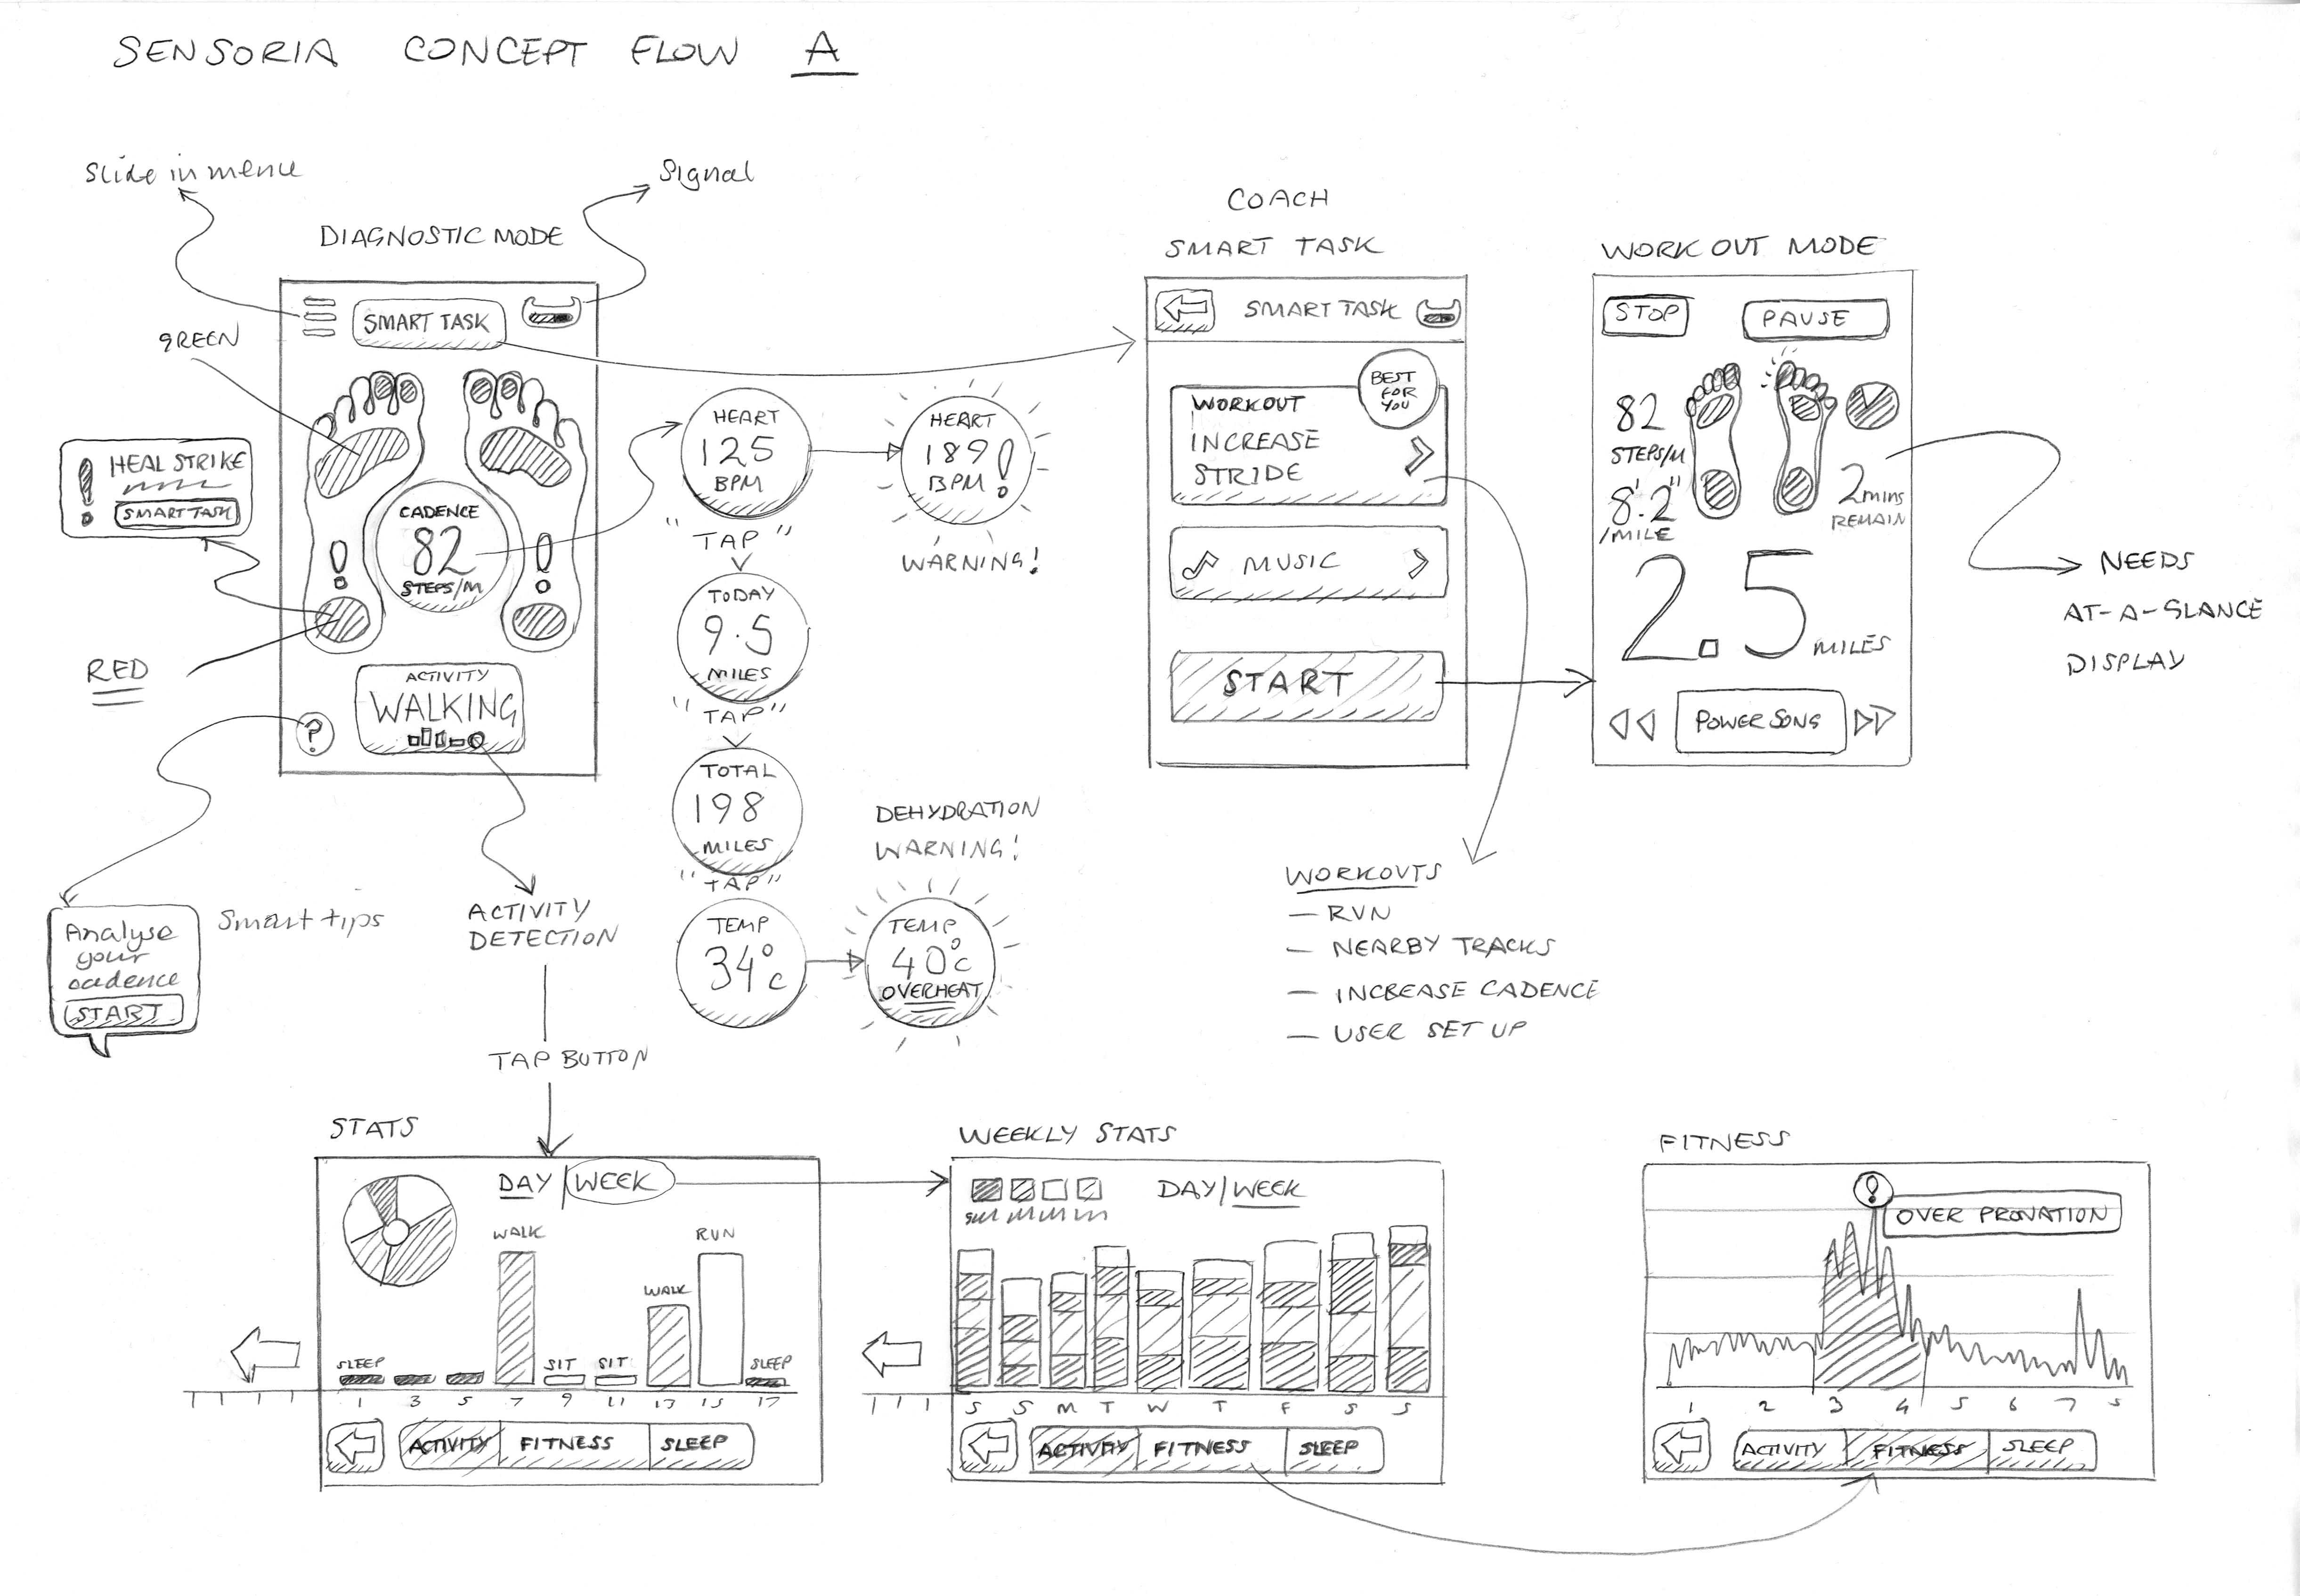 A set of hand-rendered wireframes that show flow through the interface like a storyboard